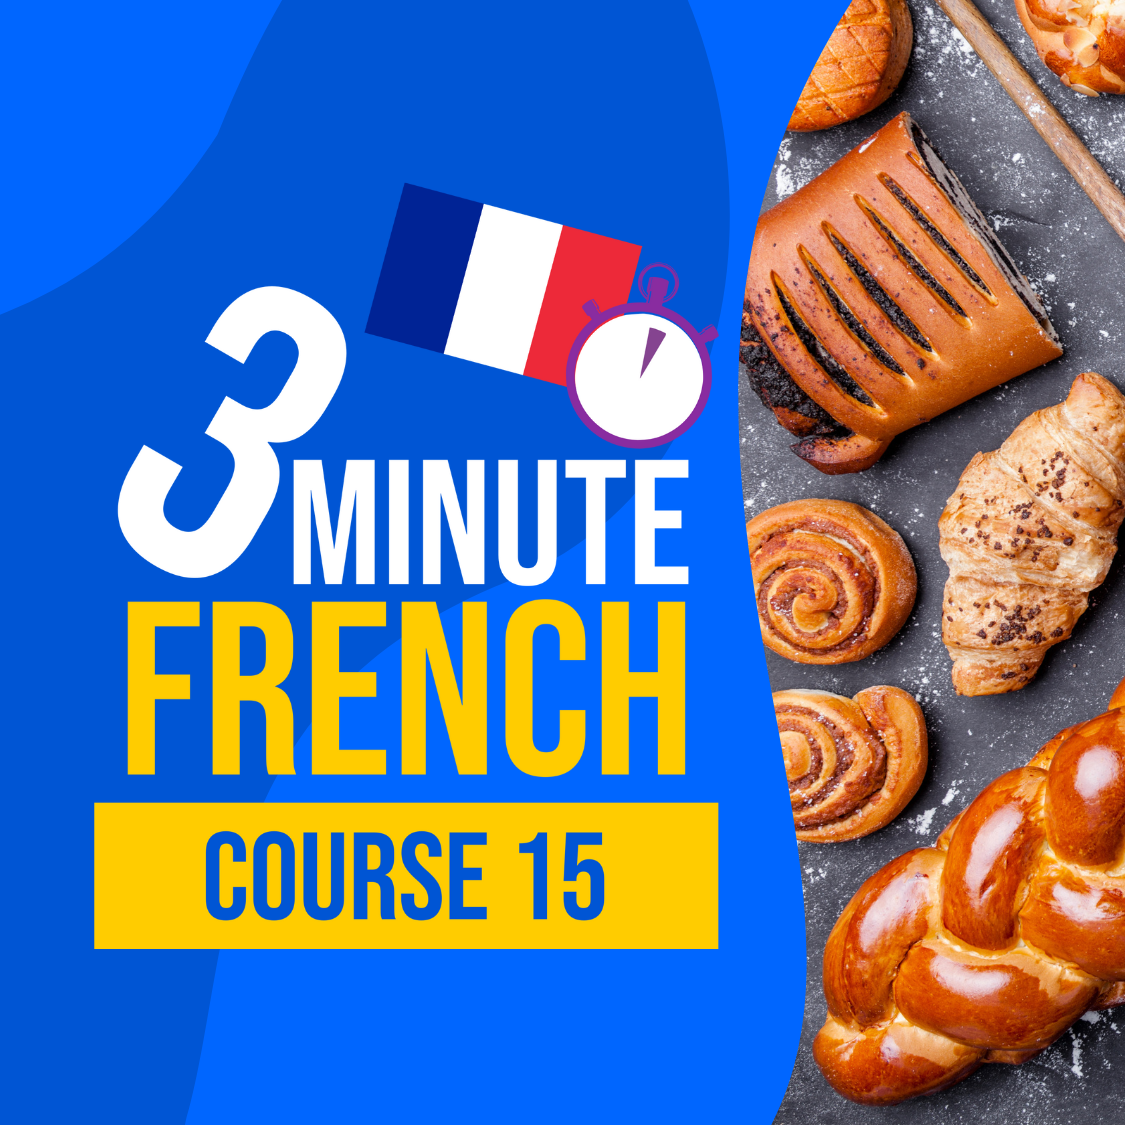 3 Minute French - Course 15